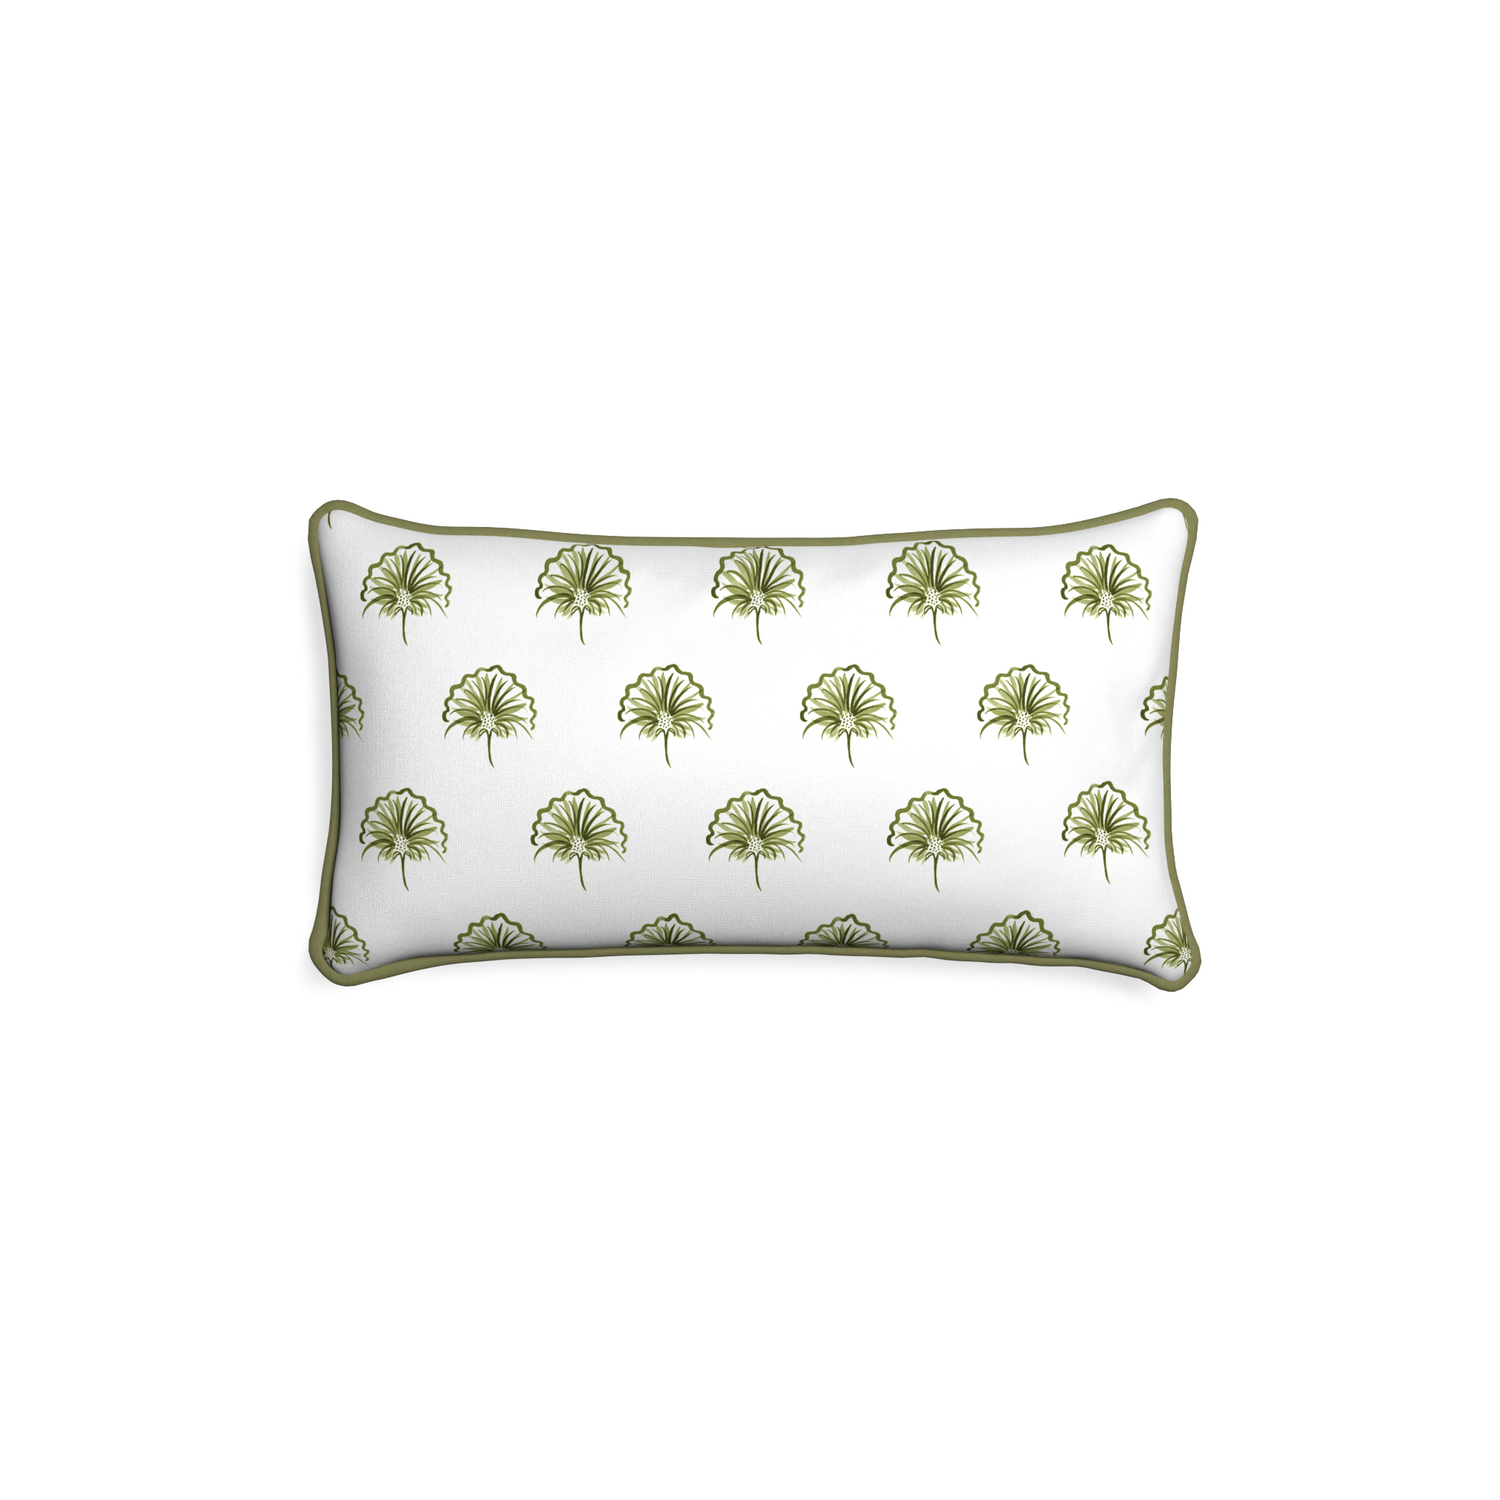 Petite-lumbar penelope moss custom green floralpillow with moss piping on white background